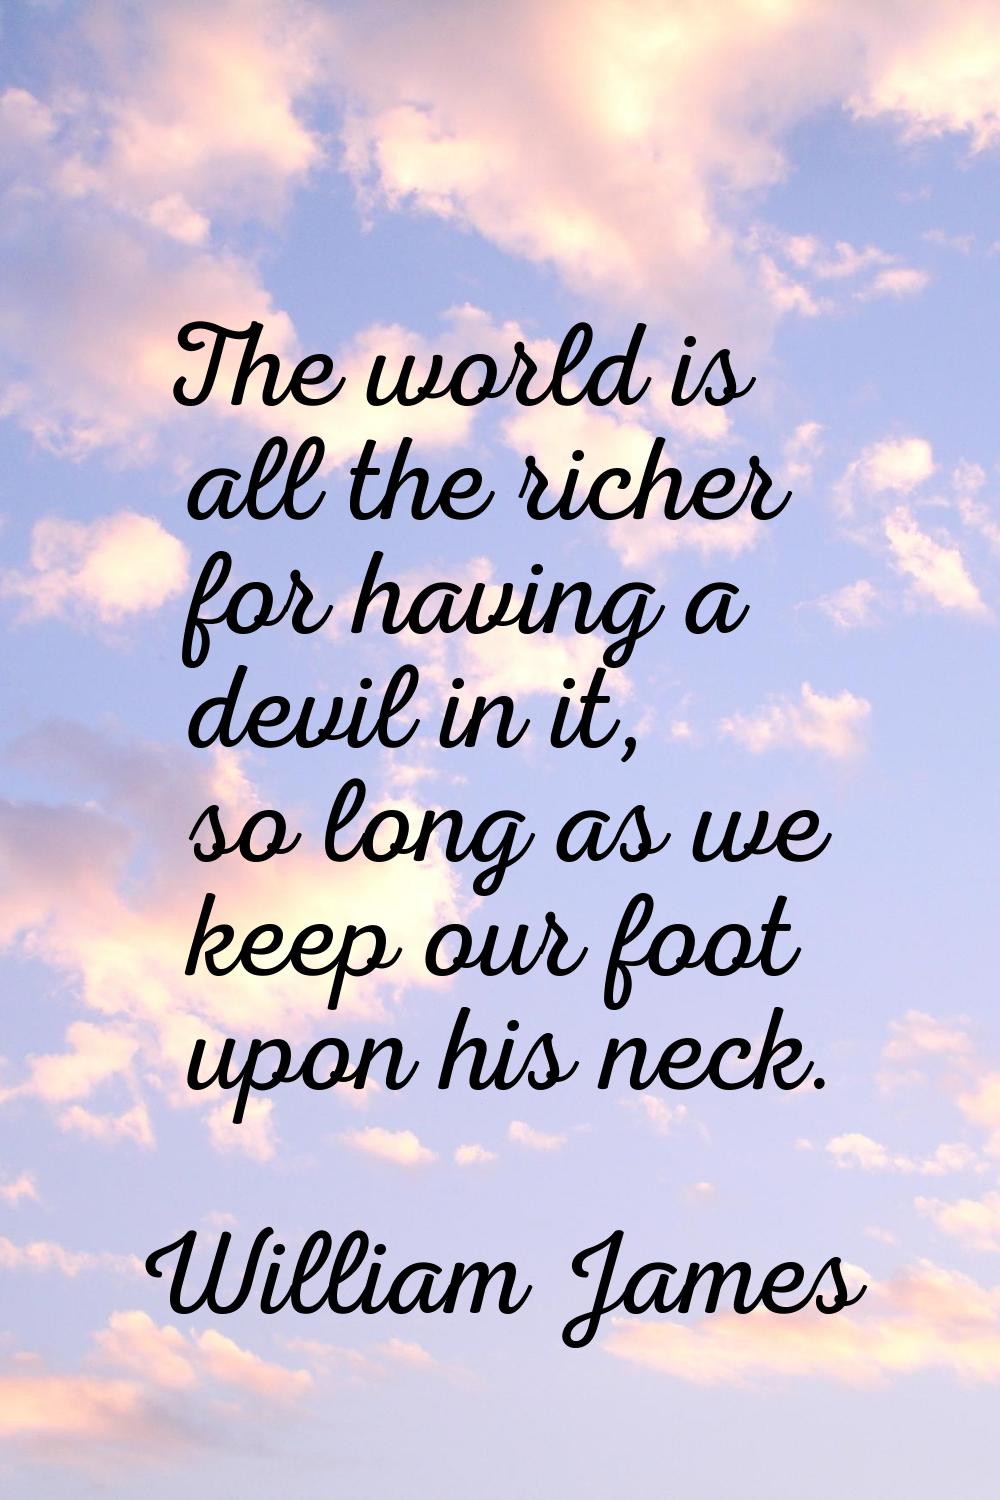 The world is all the richer for having a devil in it, so long as we keep our foot upon his neck.